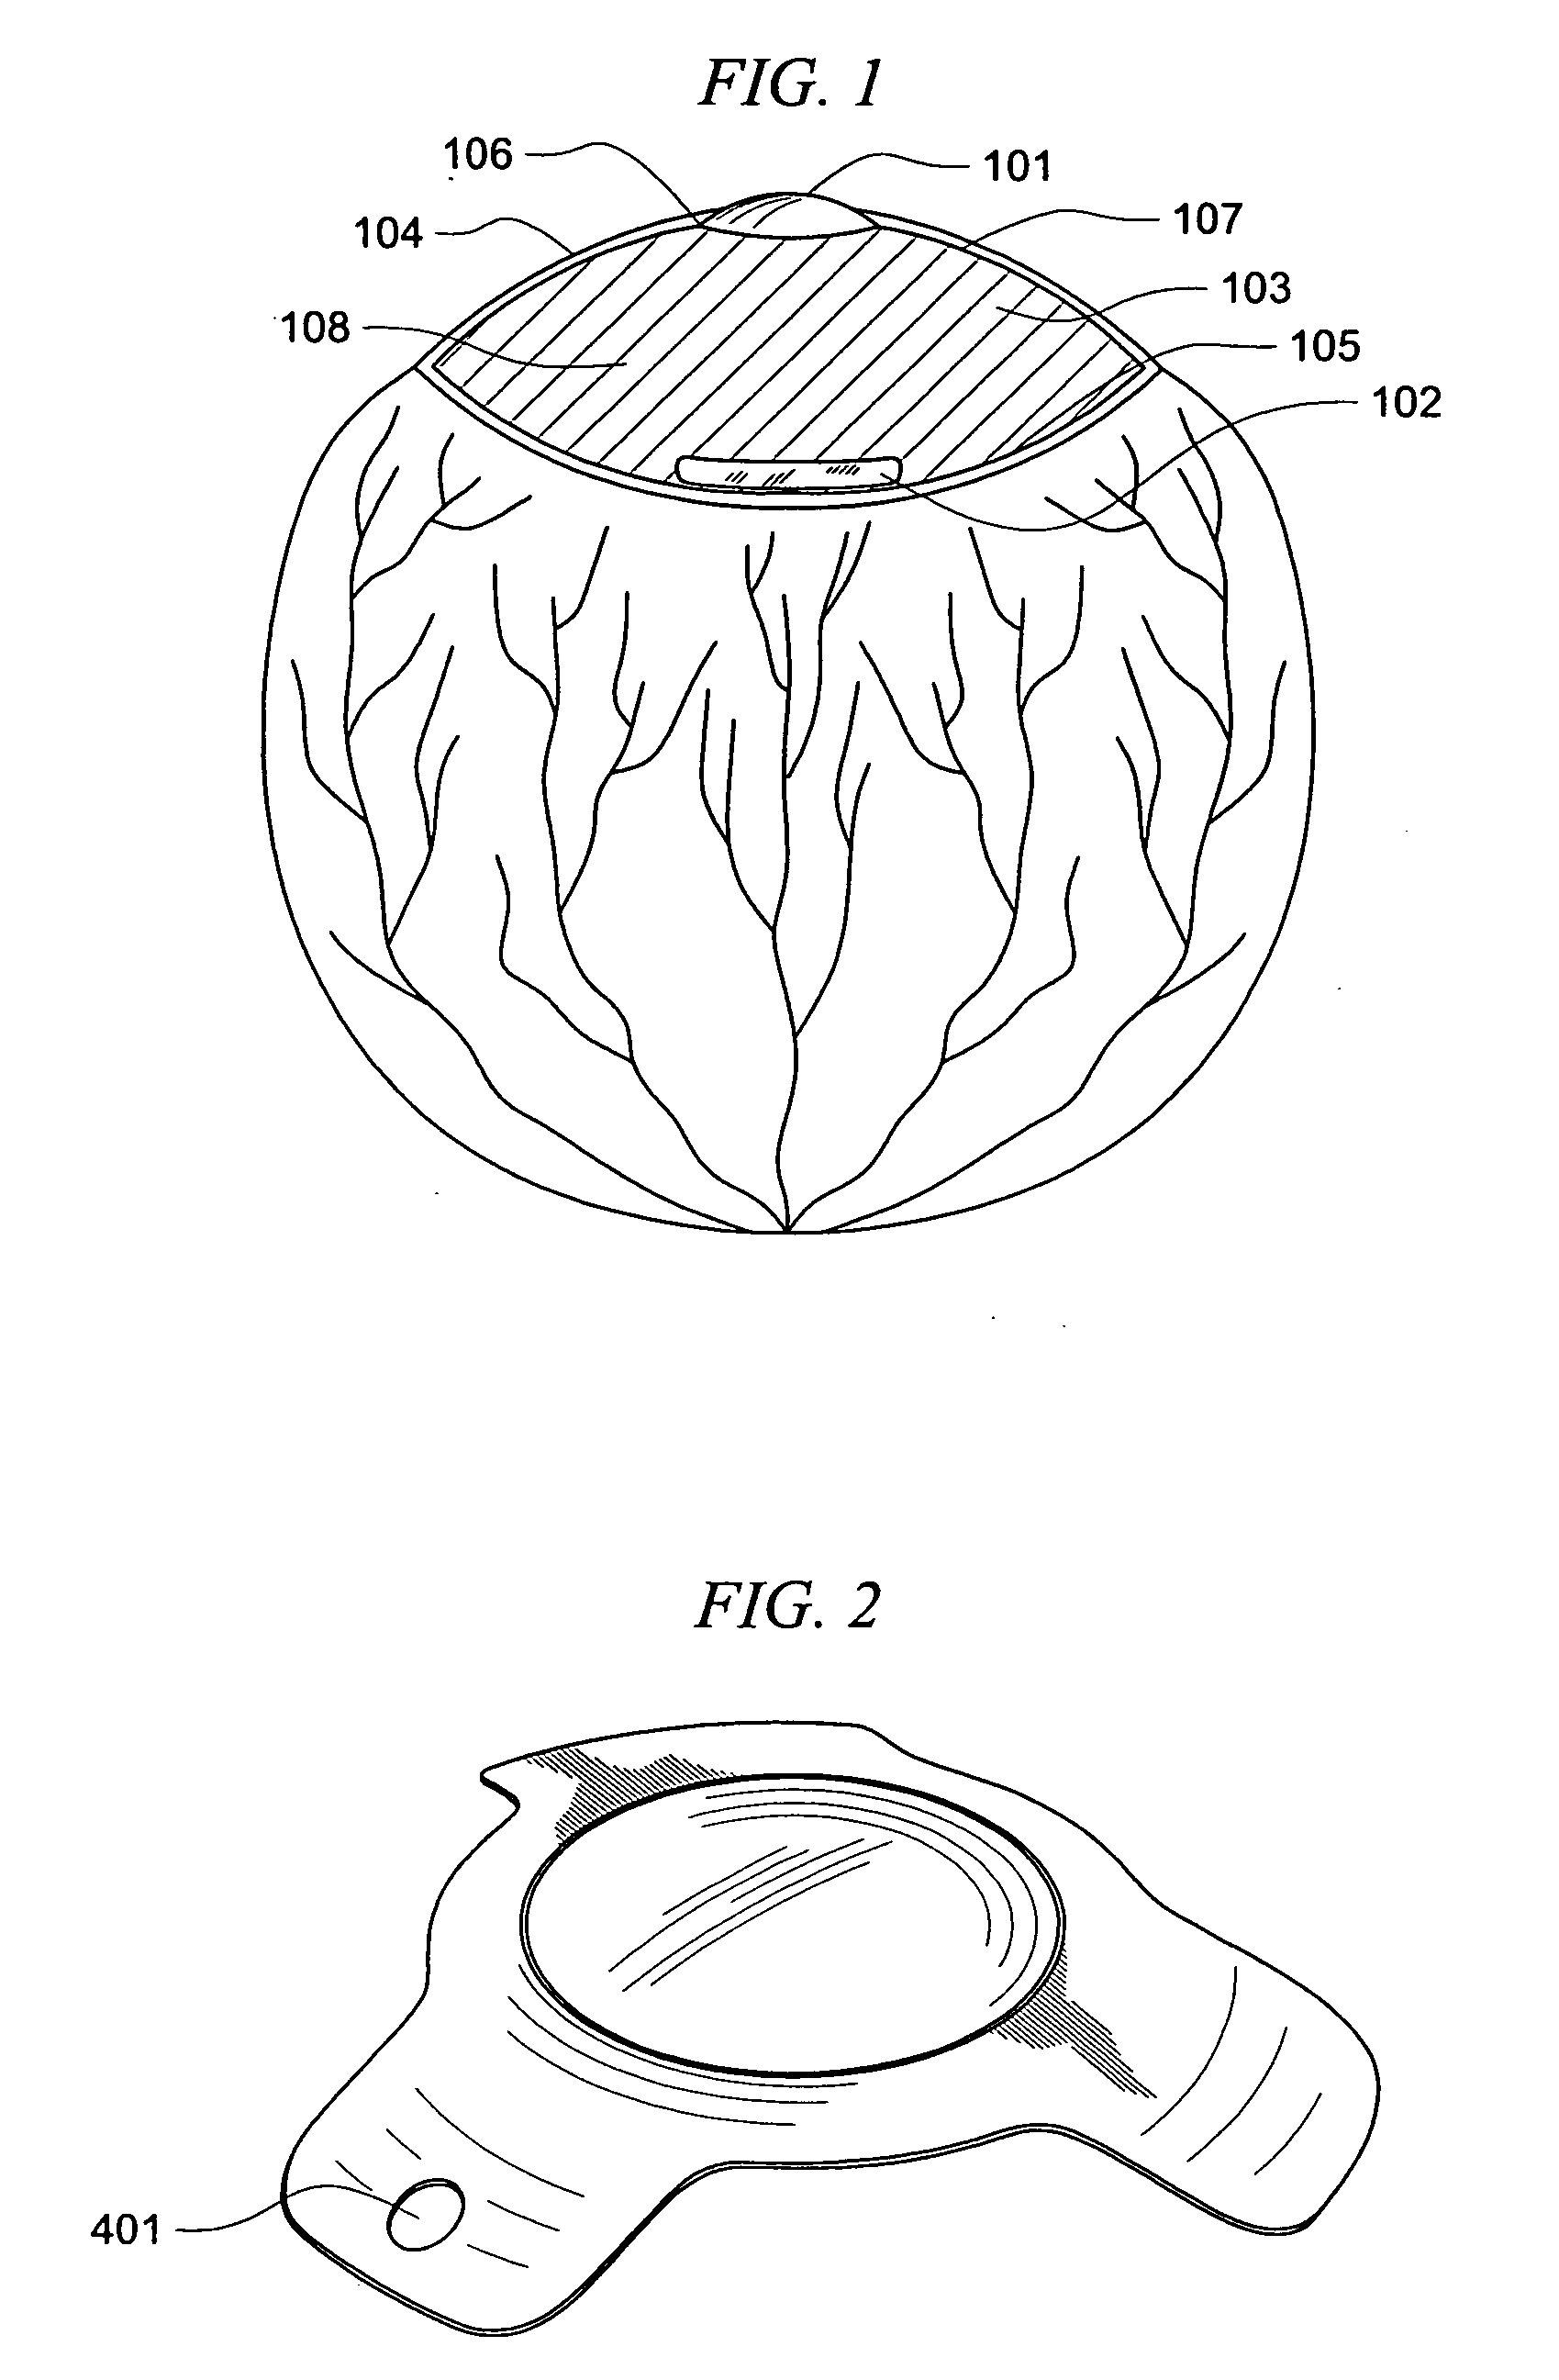 Multilens intraocular lens system with injectabe accommodation material